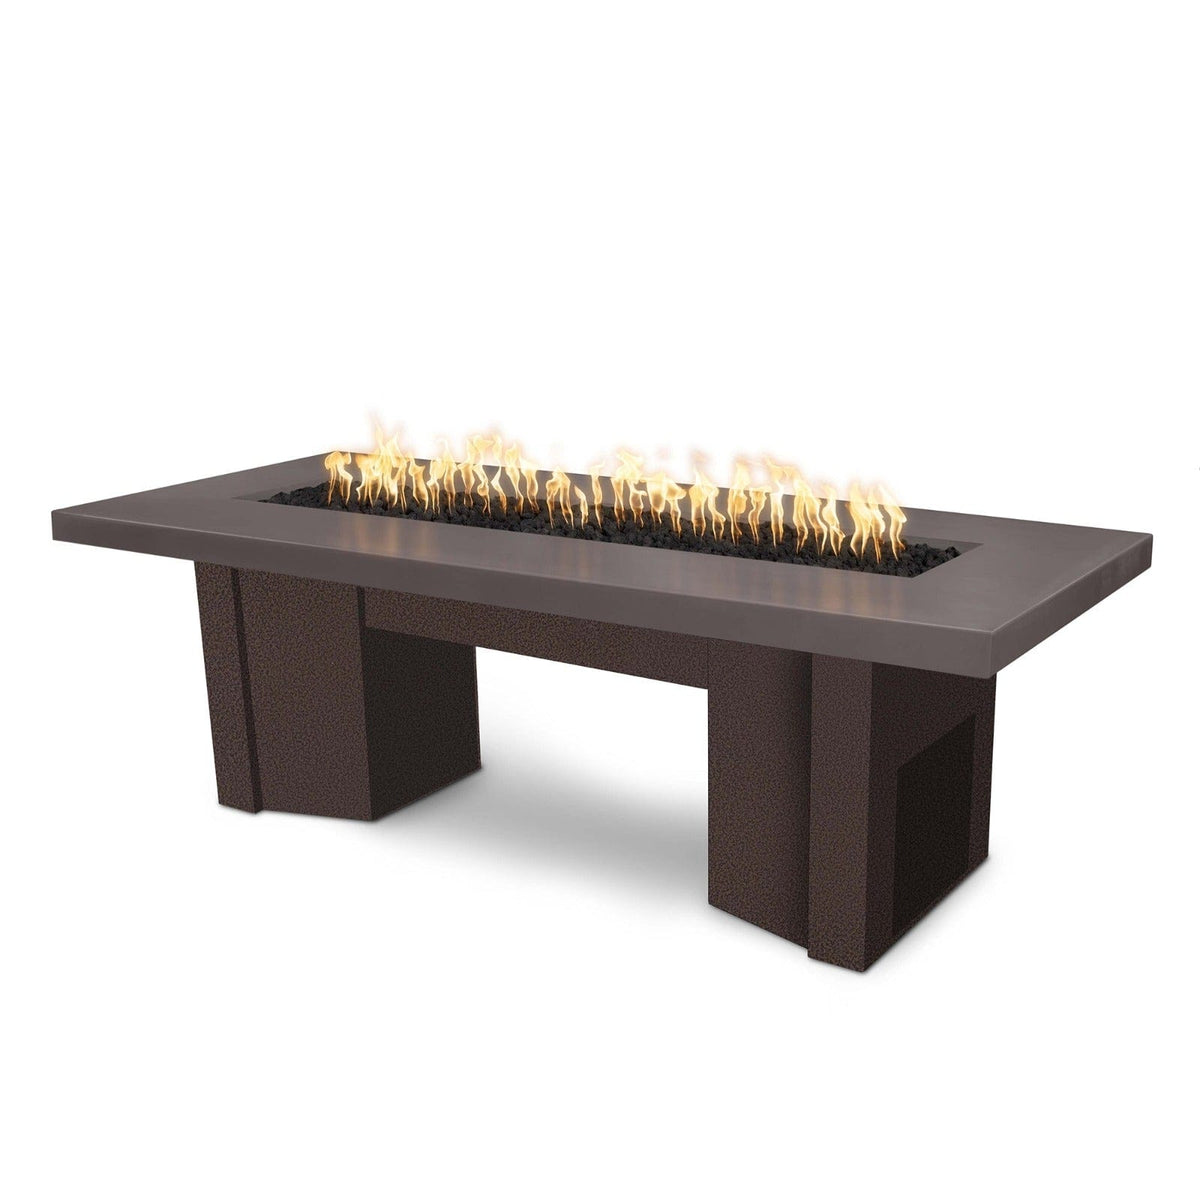 The Outdoor Plus Fire Features Chestnut (-CST) / Copper Vein Powder Coated Steel (-CPV) The Outdoor Plus 60&quot; Alameda Fire Table Smooth Concrete in Liquid Propane - Match Lit with Flame Sense System / OPT-ALMGFRC60FSML-LP